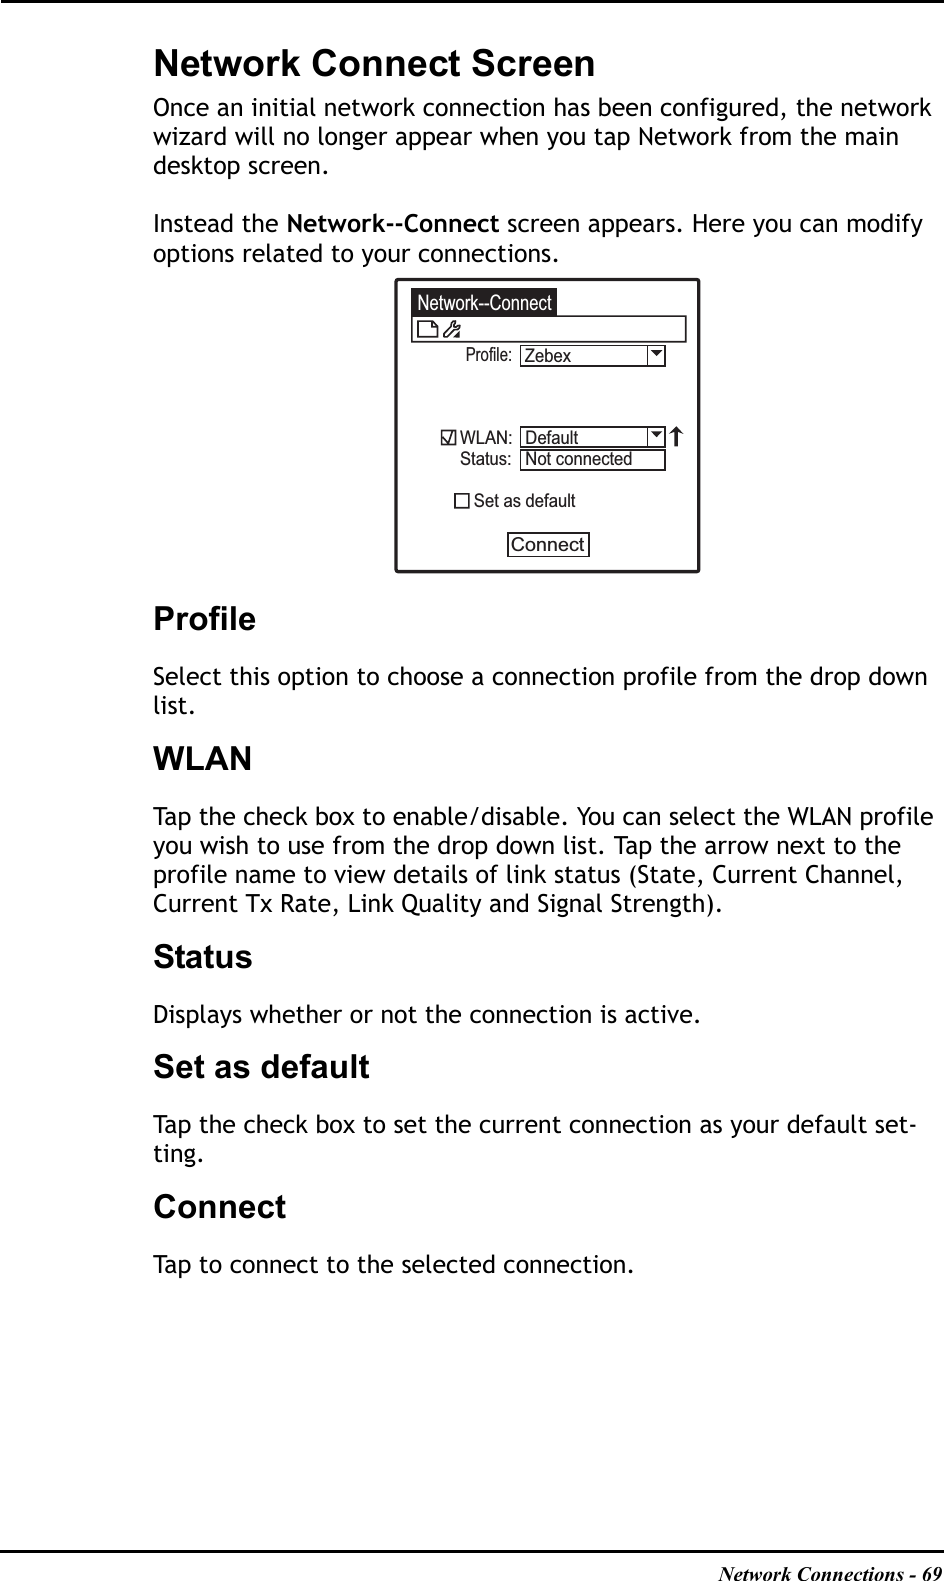 Network Connections - 69Network Connect ScreenOnce an initial network connection has been configured, the network wizard will no longer appear when you tap Network from the main desktop screen.Instead the Network--Connect screen appears. Here you can modify options related to your connections.ProfileSelect this option to choose a connection profile from the drop down list.WLANTap the check box to enable/disable. You can select the WLAN profile you wish to use from the drop down list. Tap the arrow next to the profile name to view details of link status (State, Current Channel, Current Tx Rate, Link Quality and Signal Strength).StatusDisplays whether or not the connection is active.Set as defaultTap the check box to set the current connection as your default set-ting.ConnectTap to connect to the selected connection.Network--ConnectProfile:WLAN:Status:   Set as defaultConnectDefaultNot connectedZebex